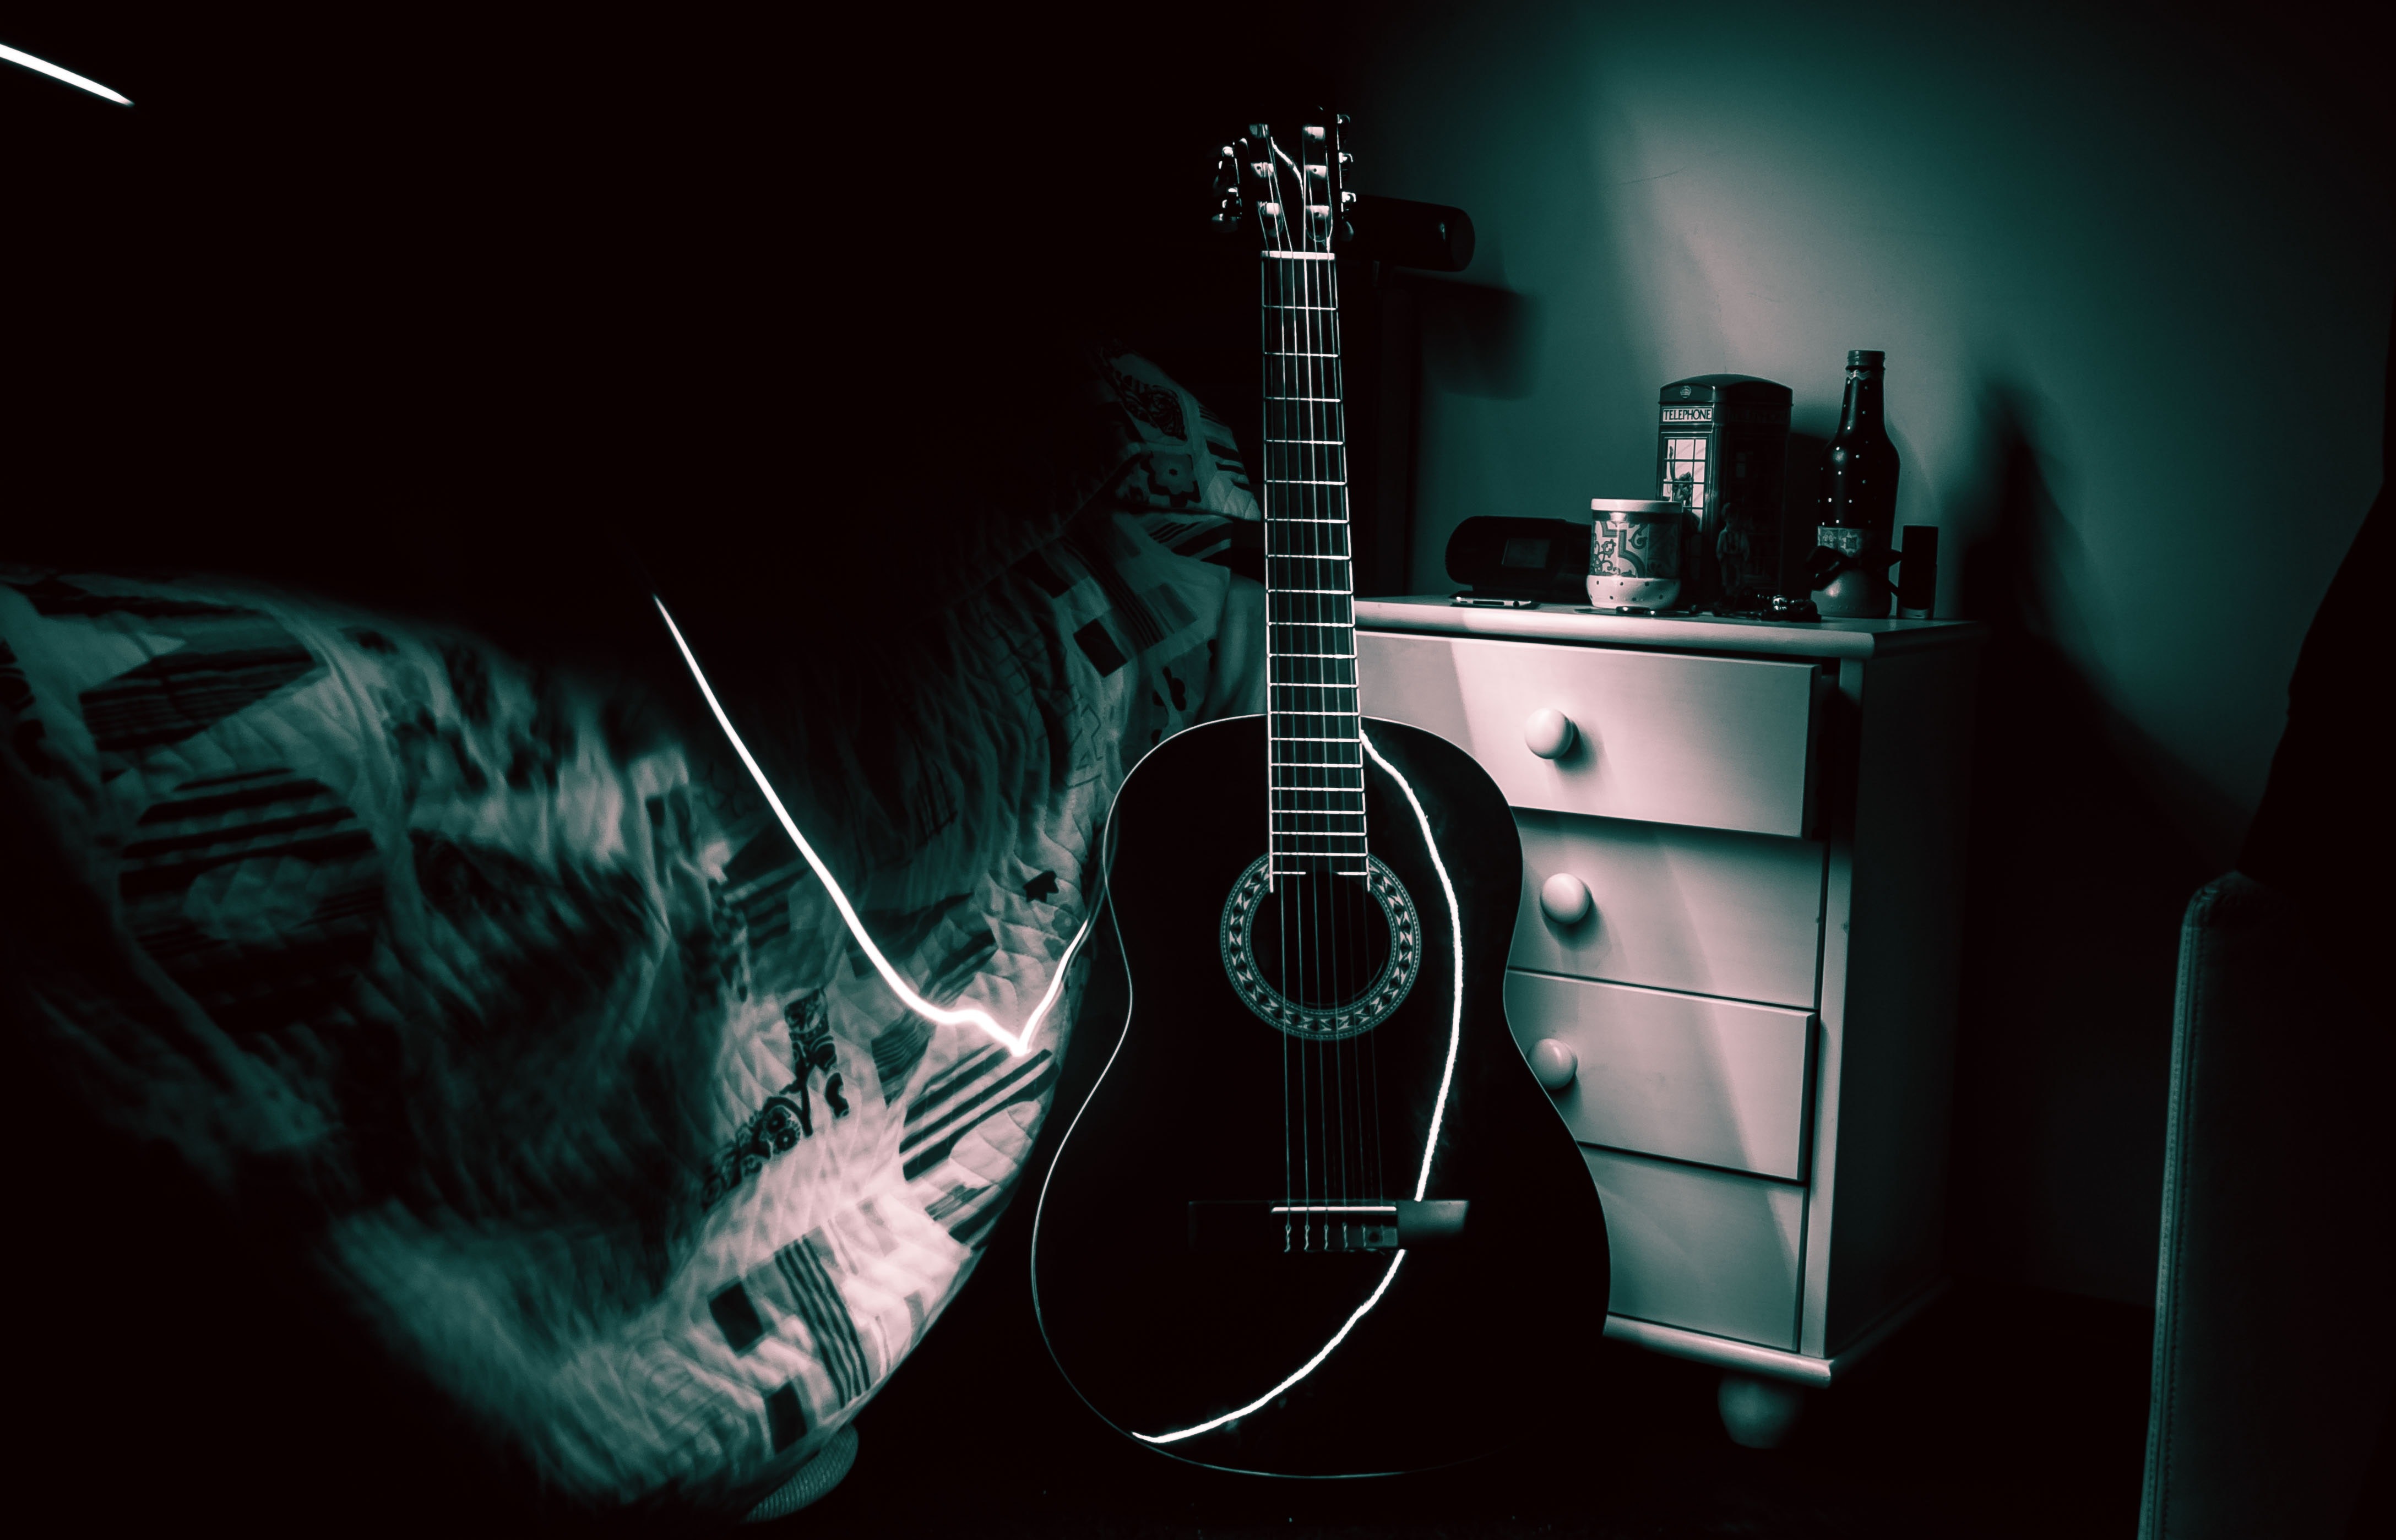 View Of Guitar Photo - Acoustic Band Art , HD Wallpaper & Backgrounds